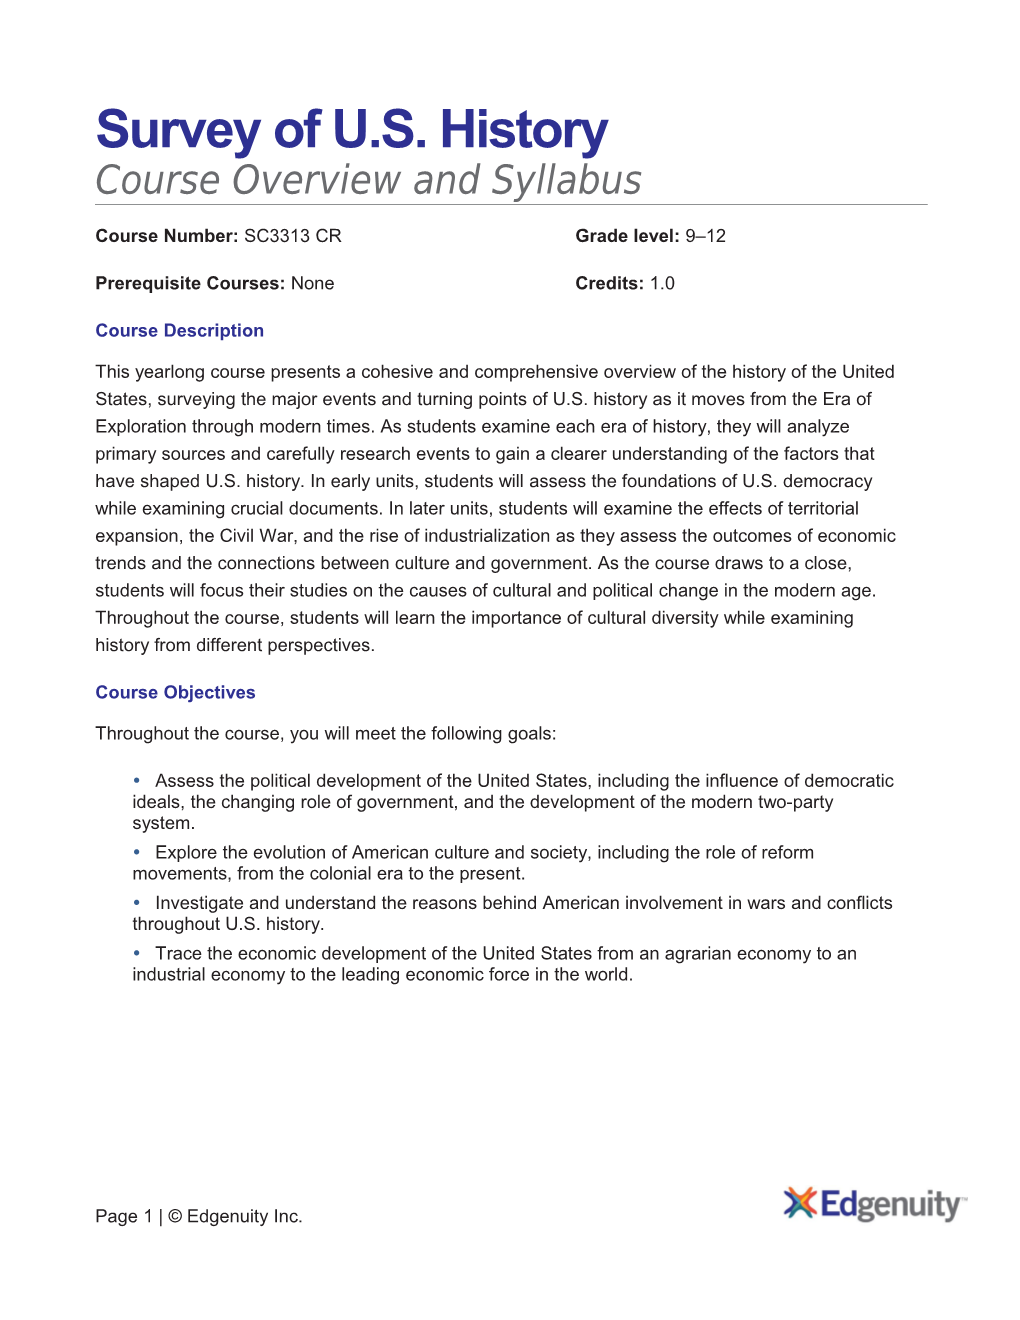 Course Overview and Syllabus